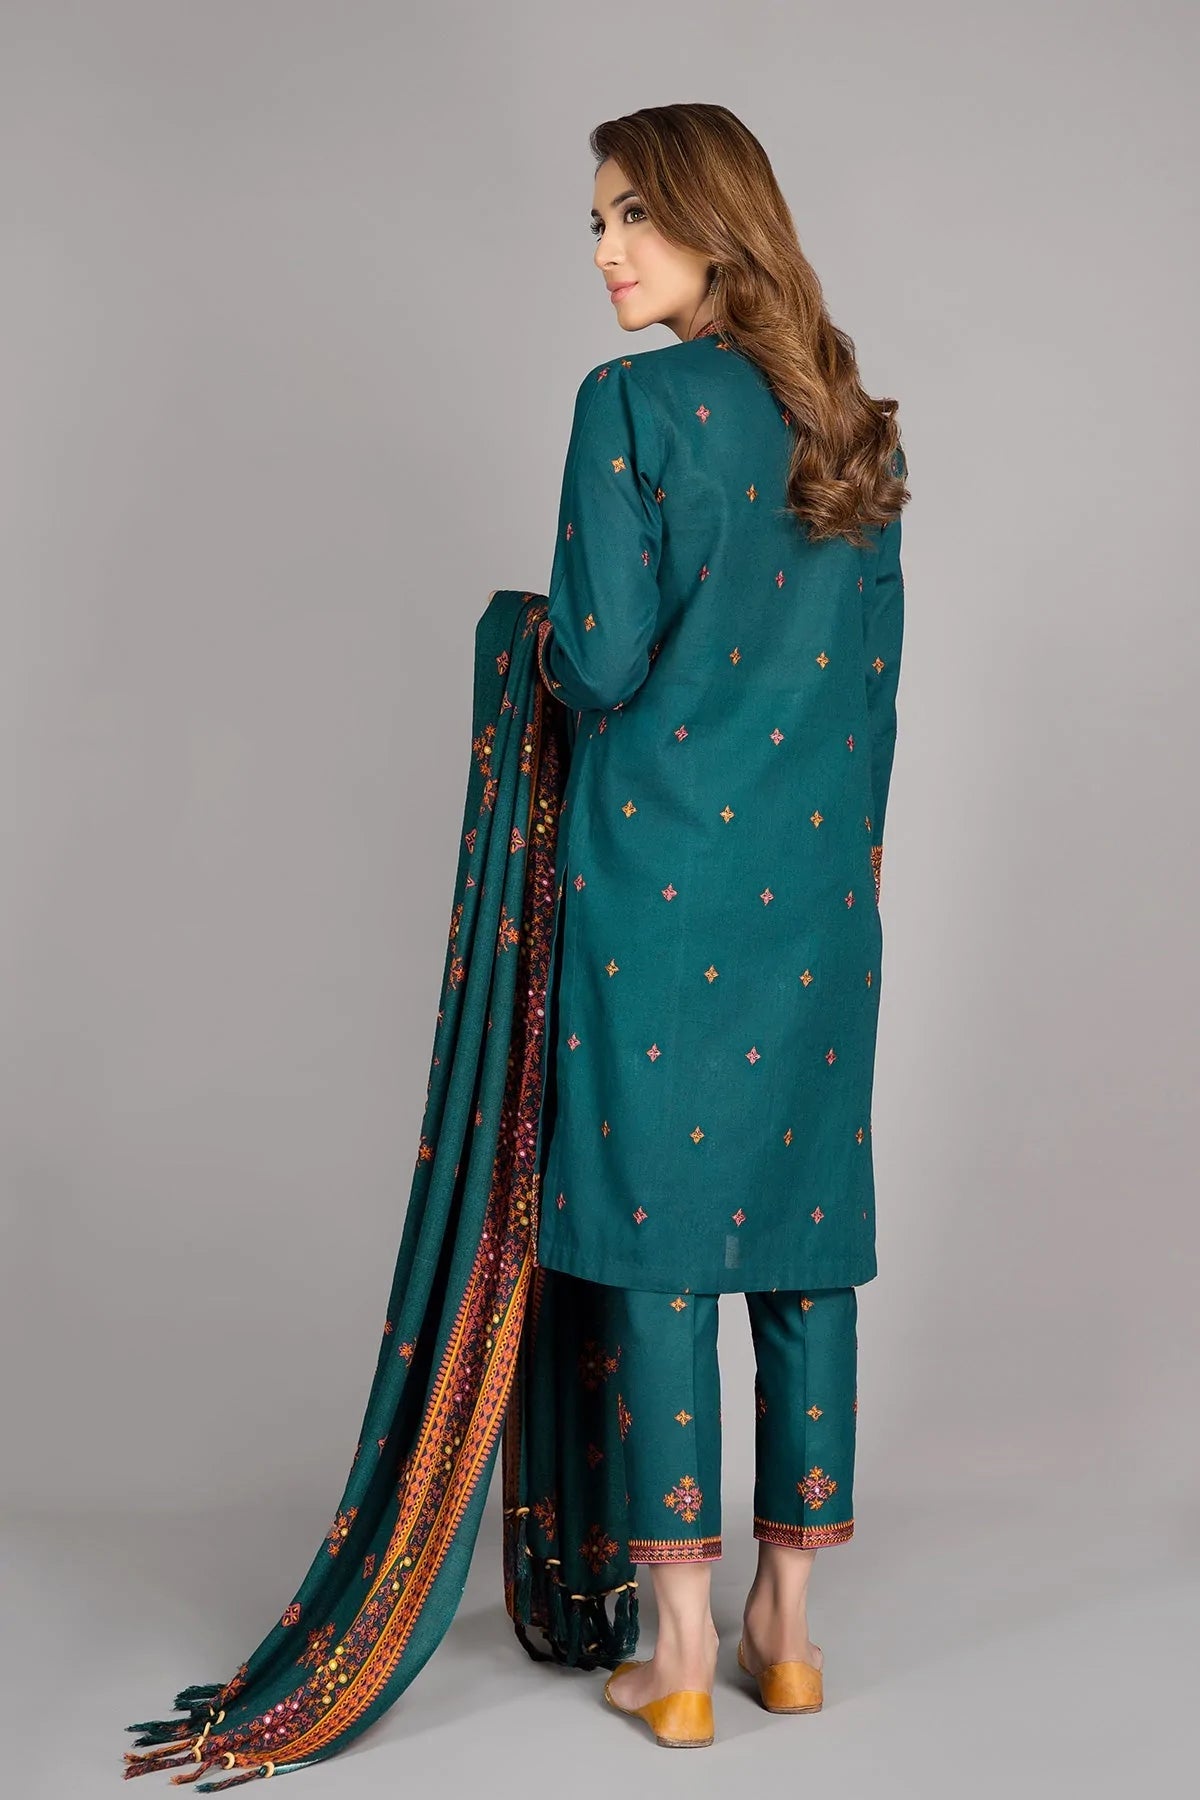 ZN527- WINTER kayseria-3Pc Linen Winter Collection Heavy Embroidered Suit